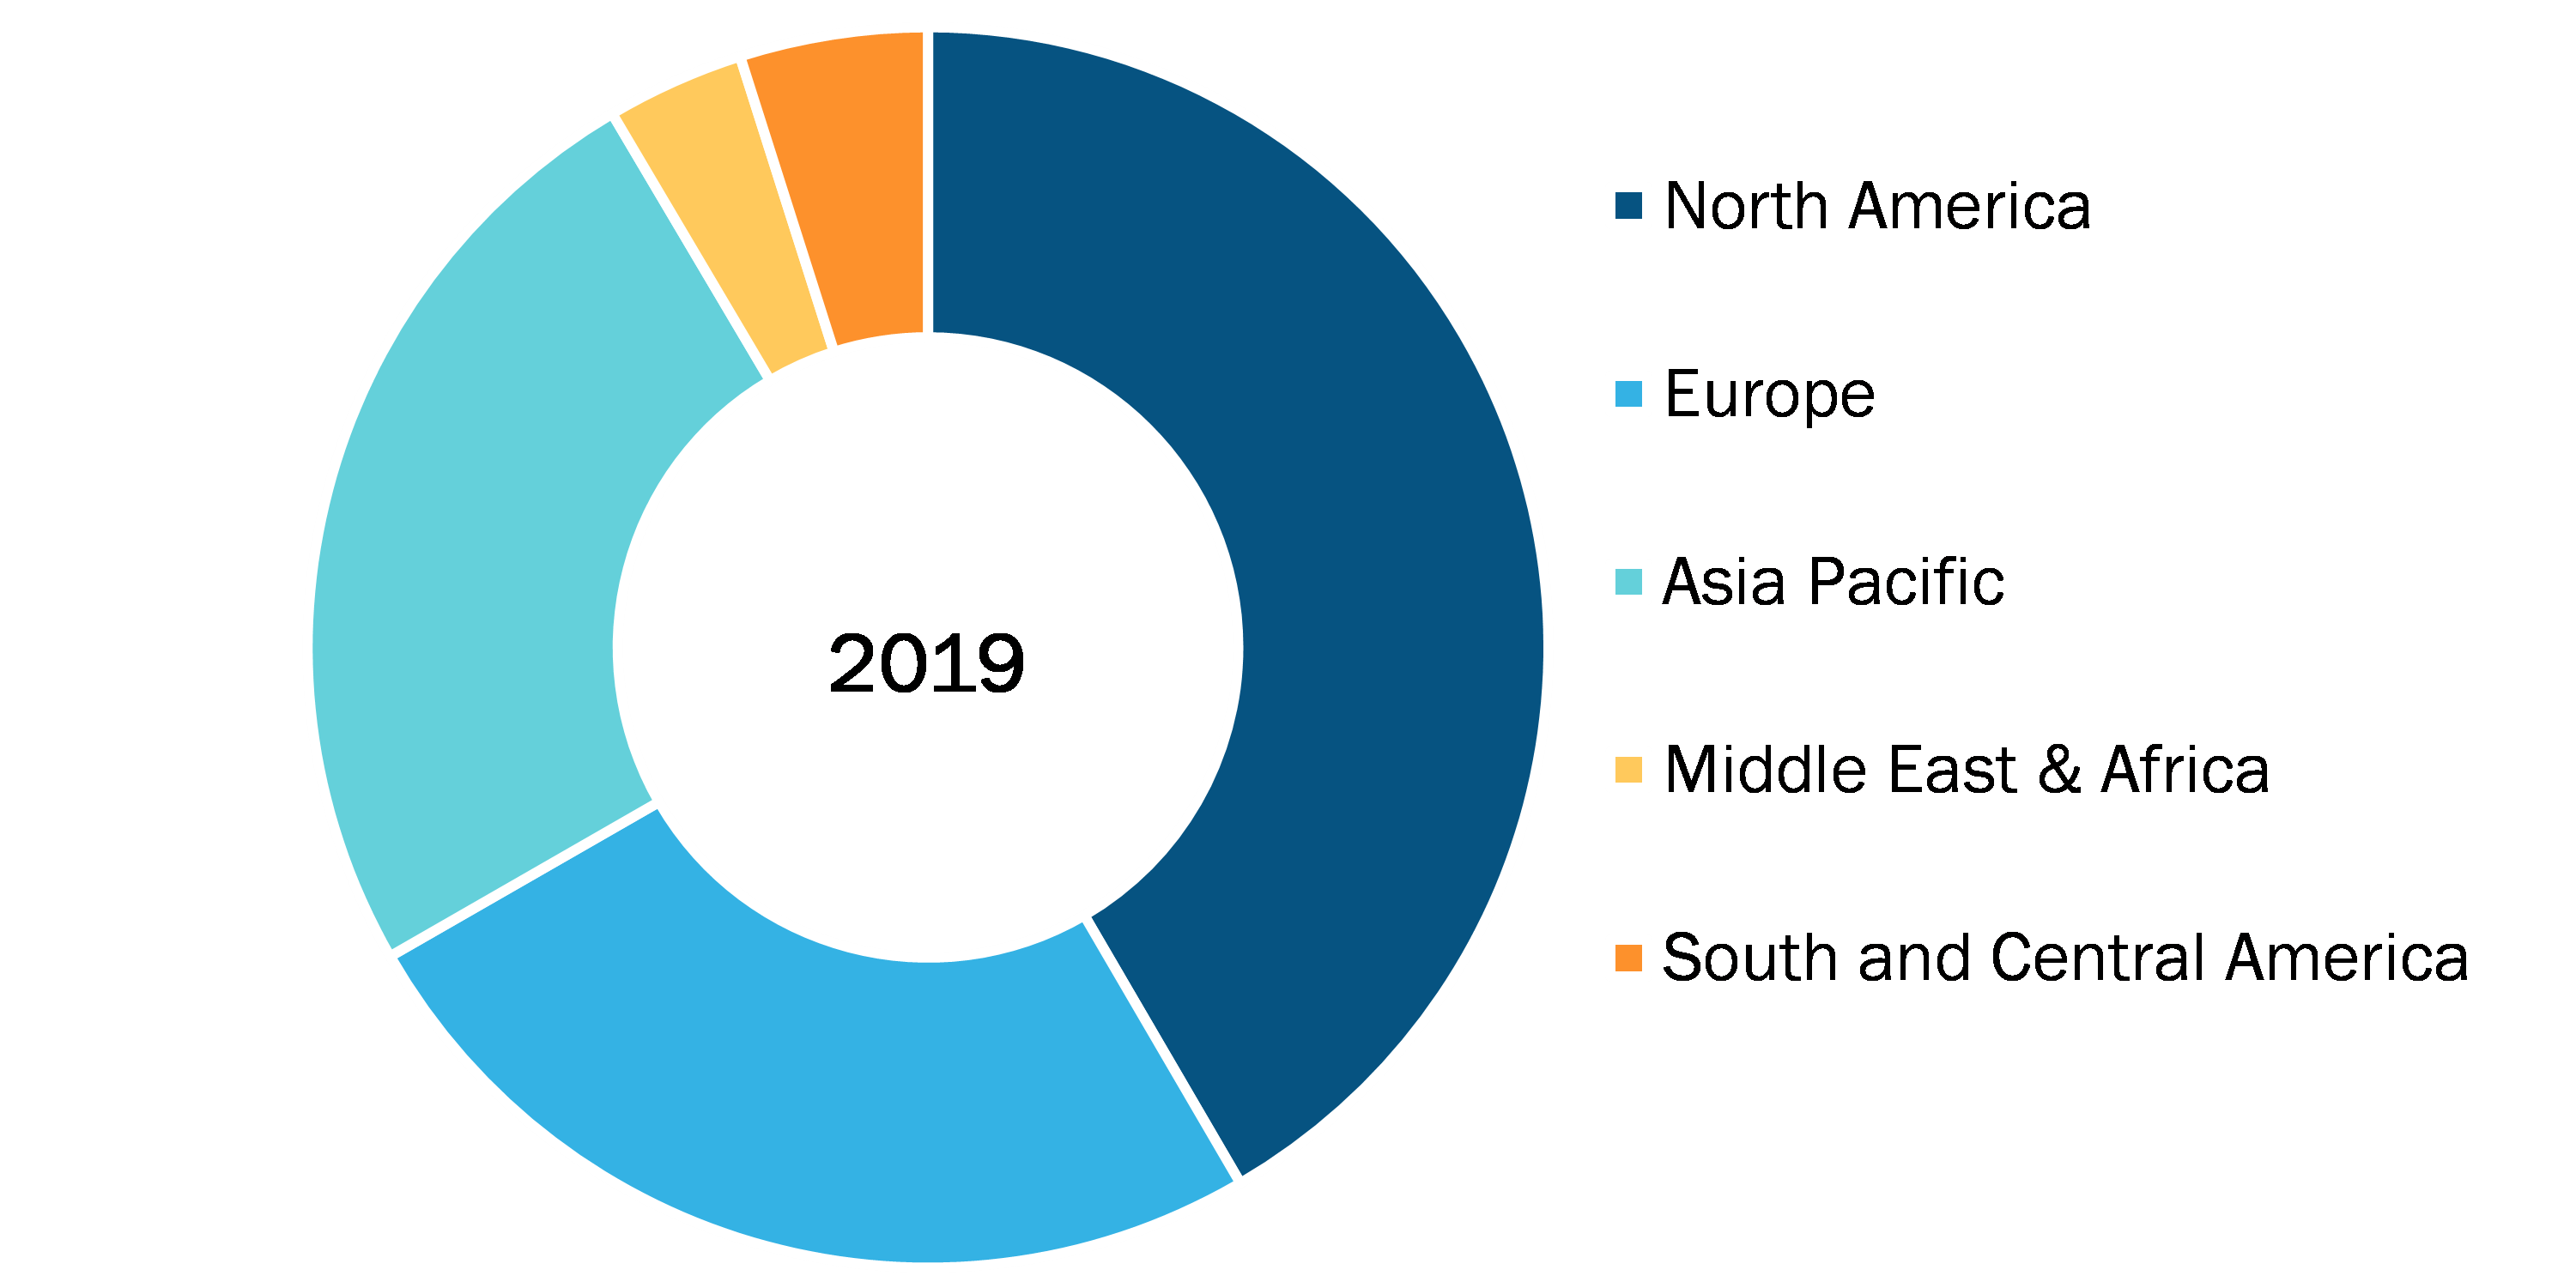 Medical Device Adhesive Market, by Region, 2019 (%)